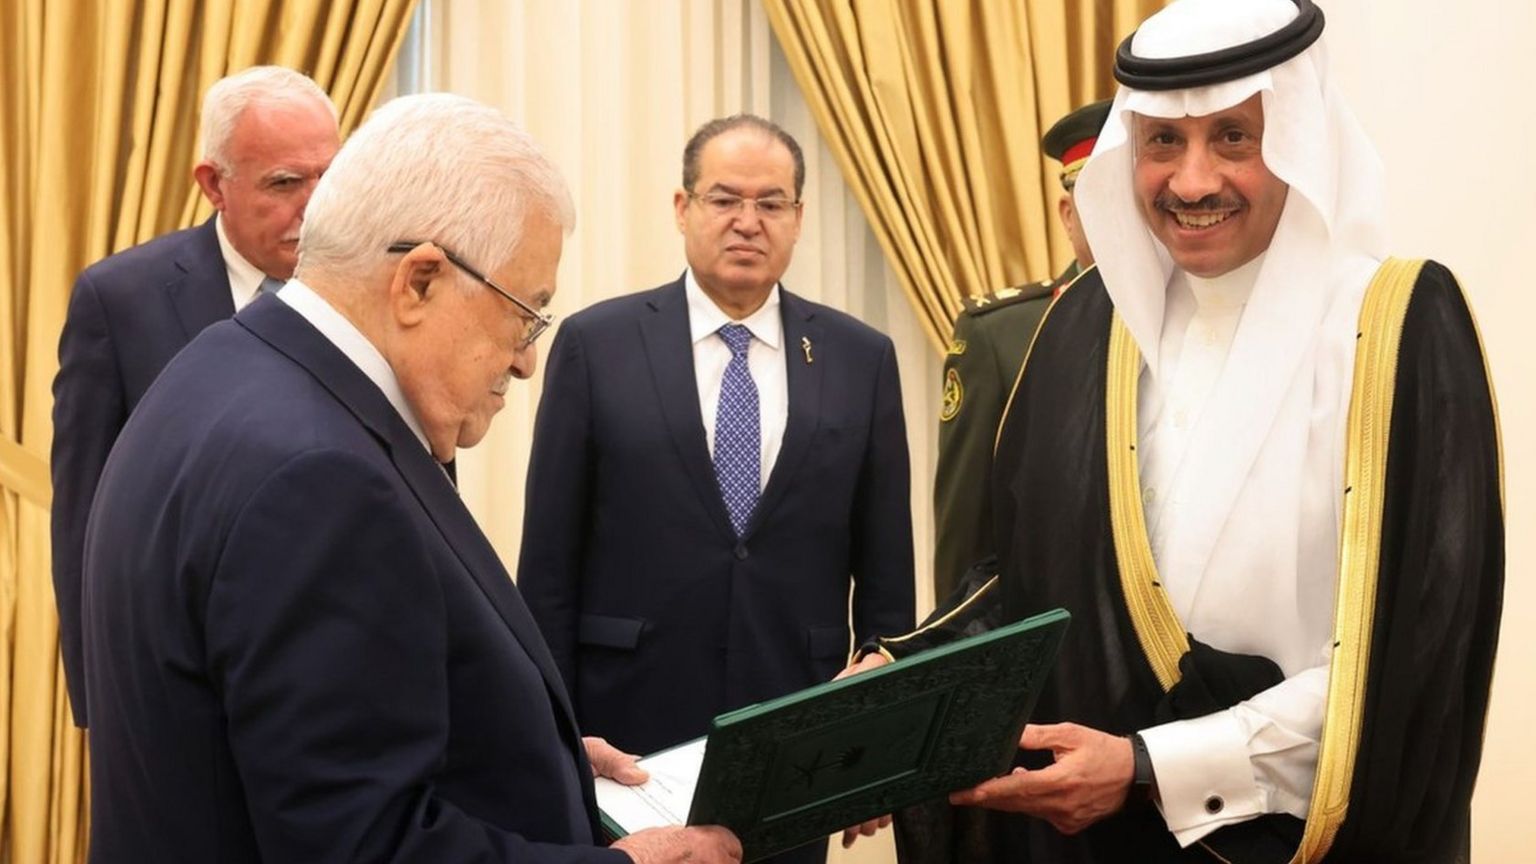 Saudi envoy Nayef al-Sudairi (R) presents his credentials to Palestinian President Mahmoud Abbas (L) in Ramallah, in the occupied West Bank (26 September 2023)